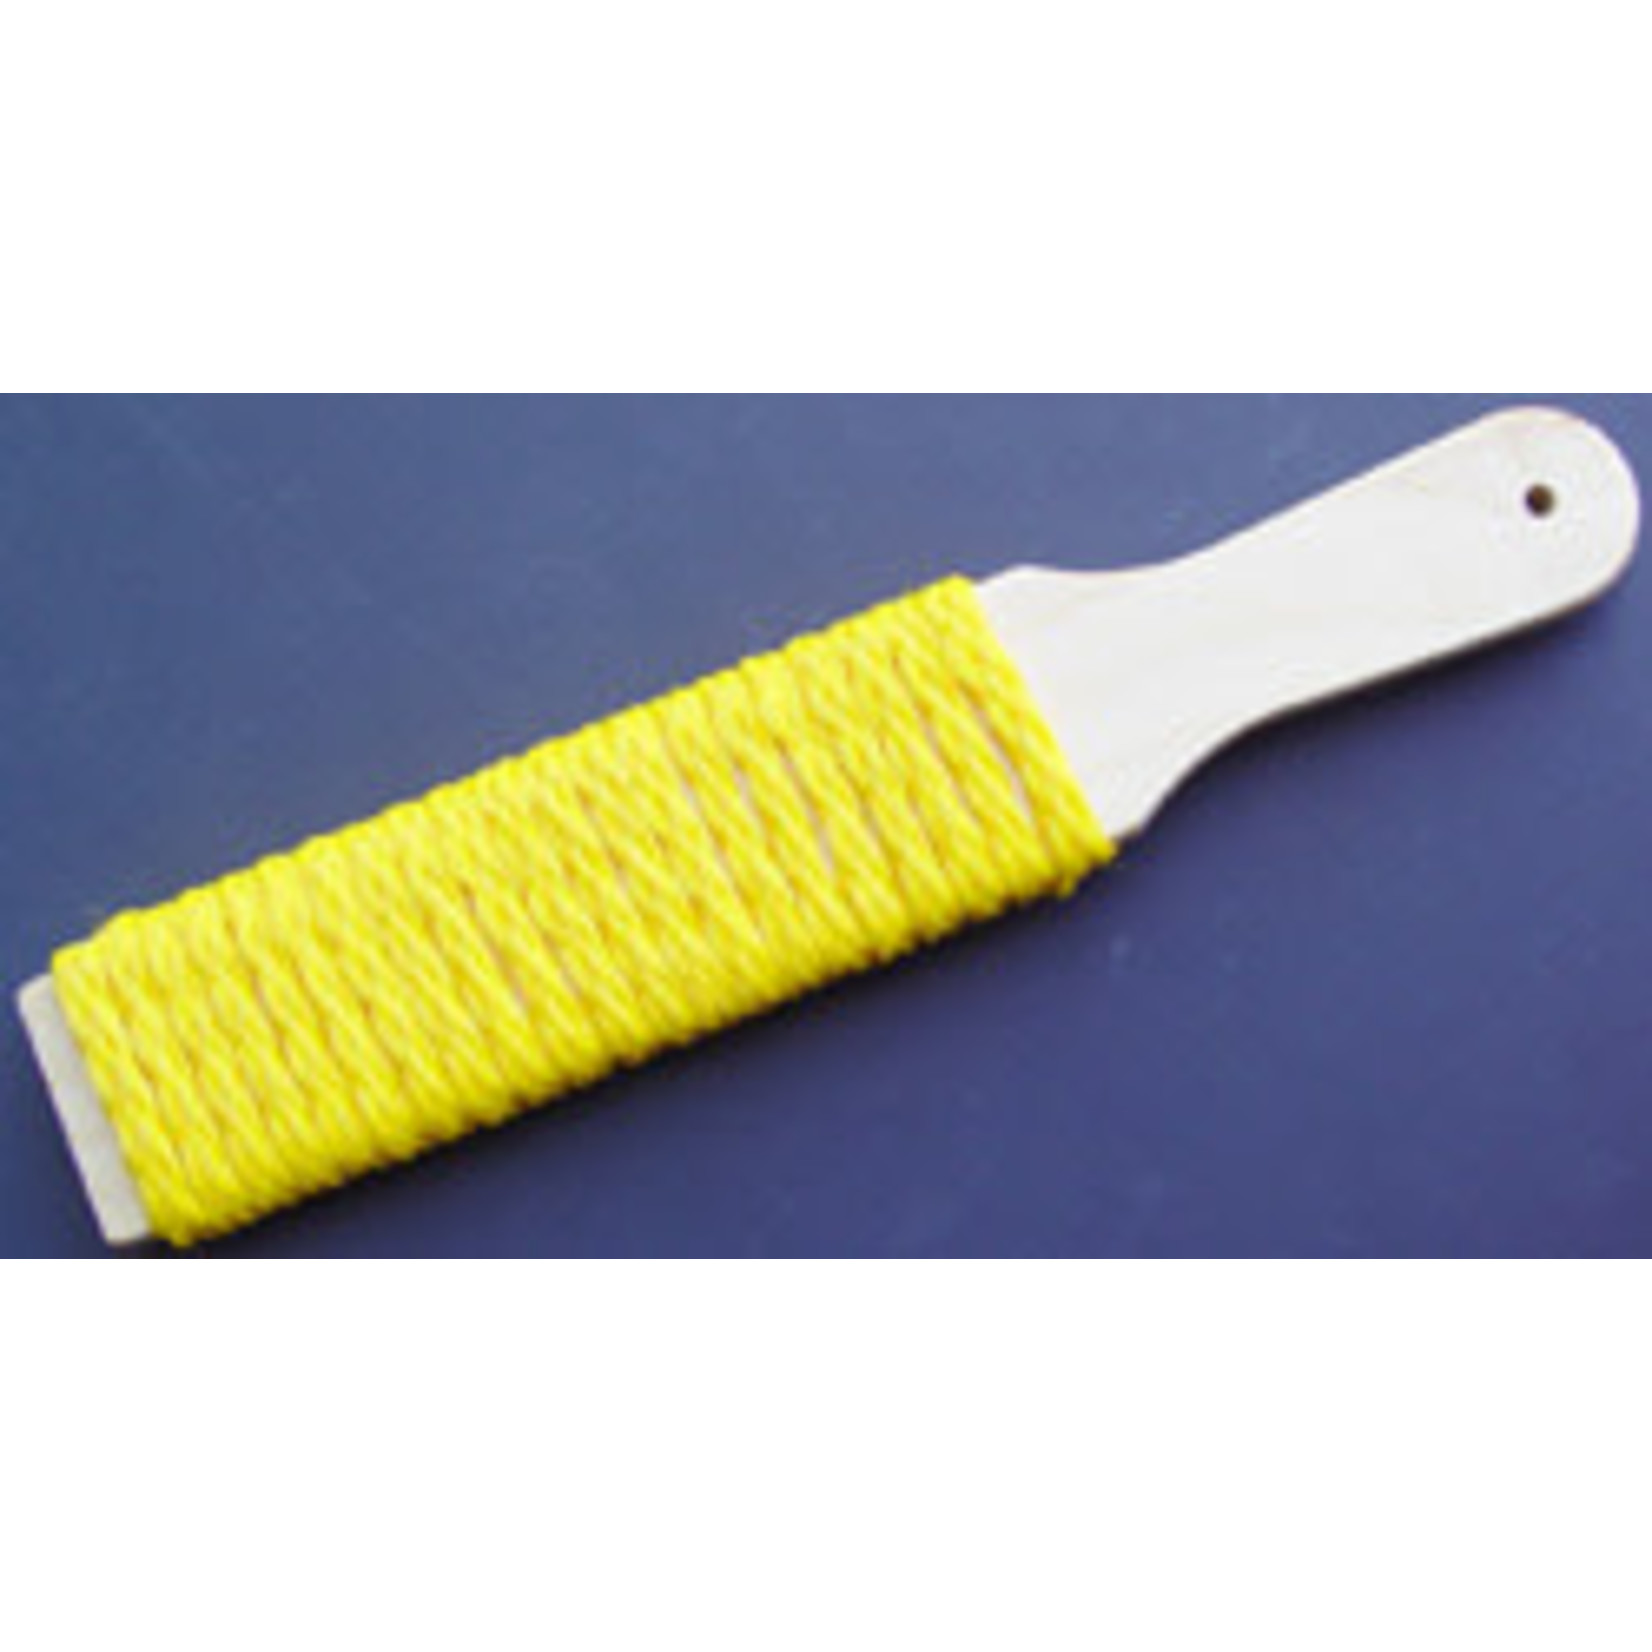 Falcon Rope Texture Paddle